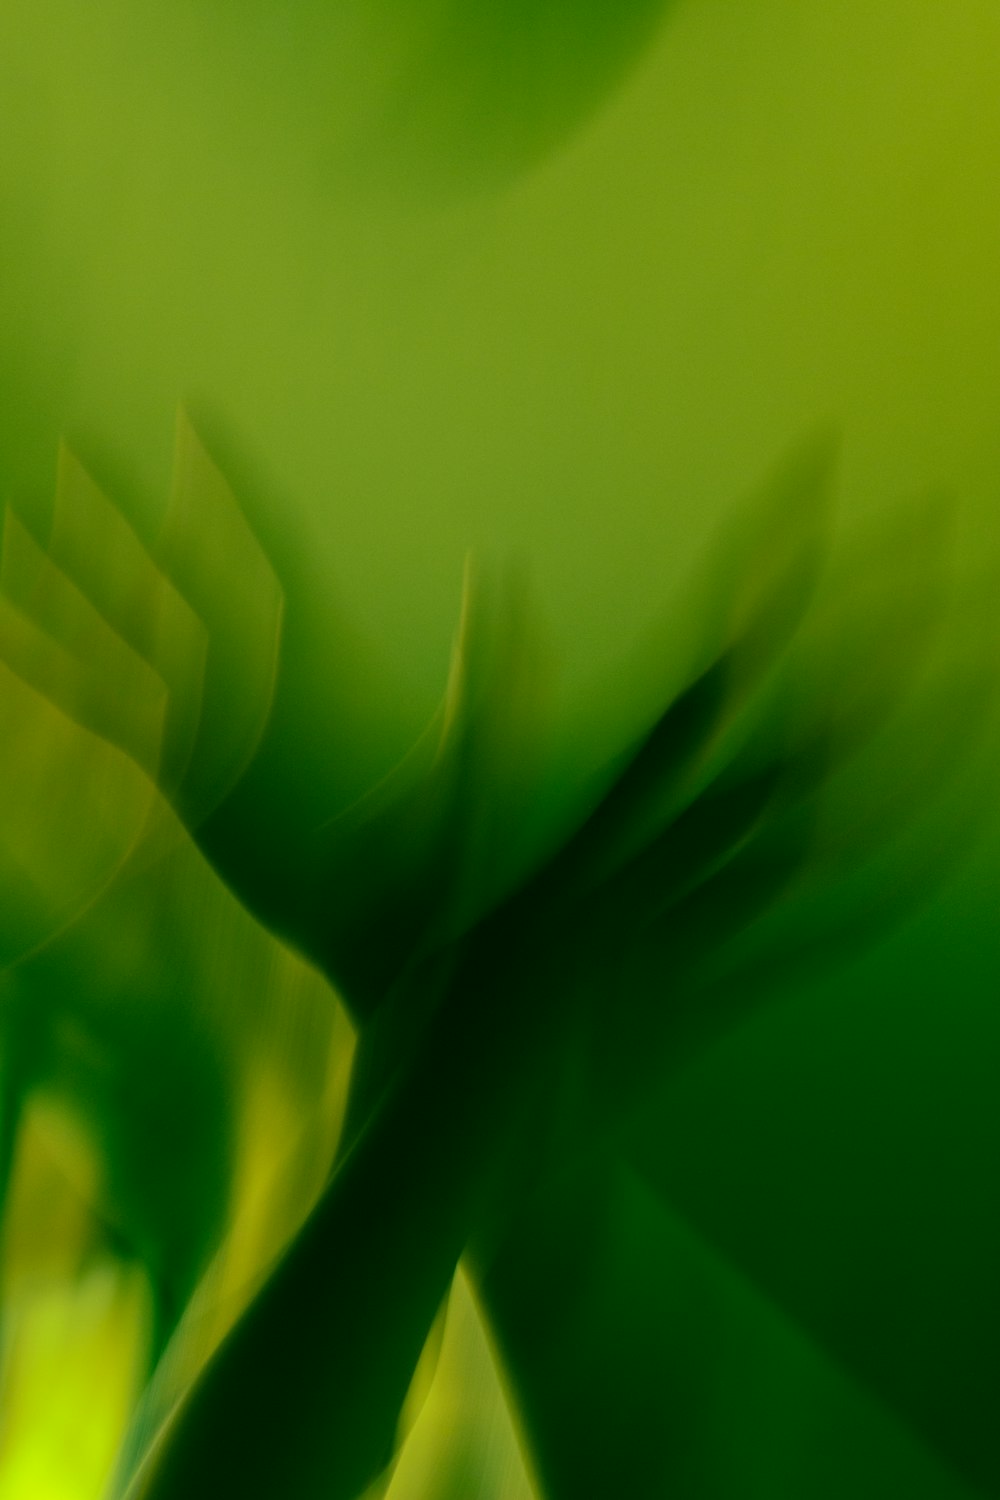 a blurry photo of a green and yellow background